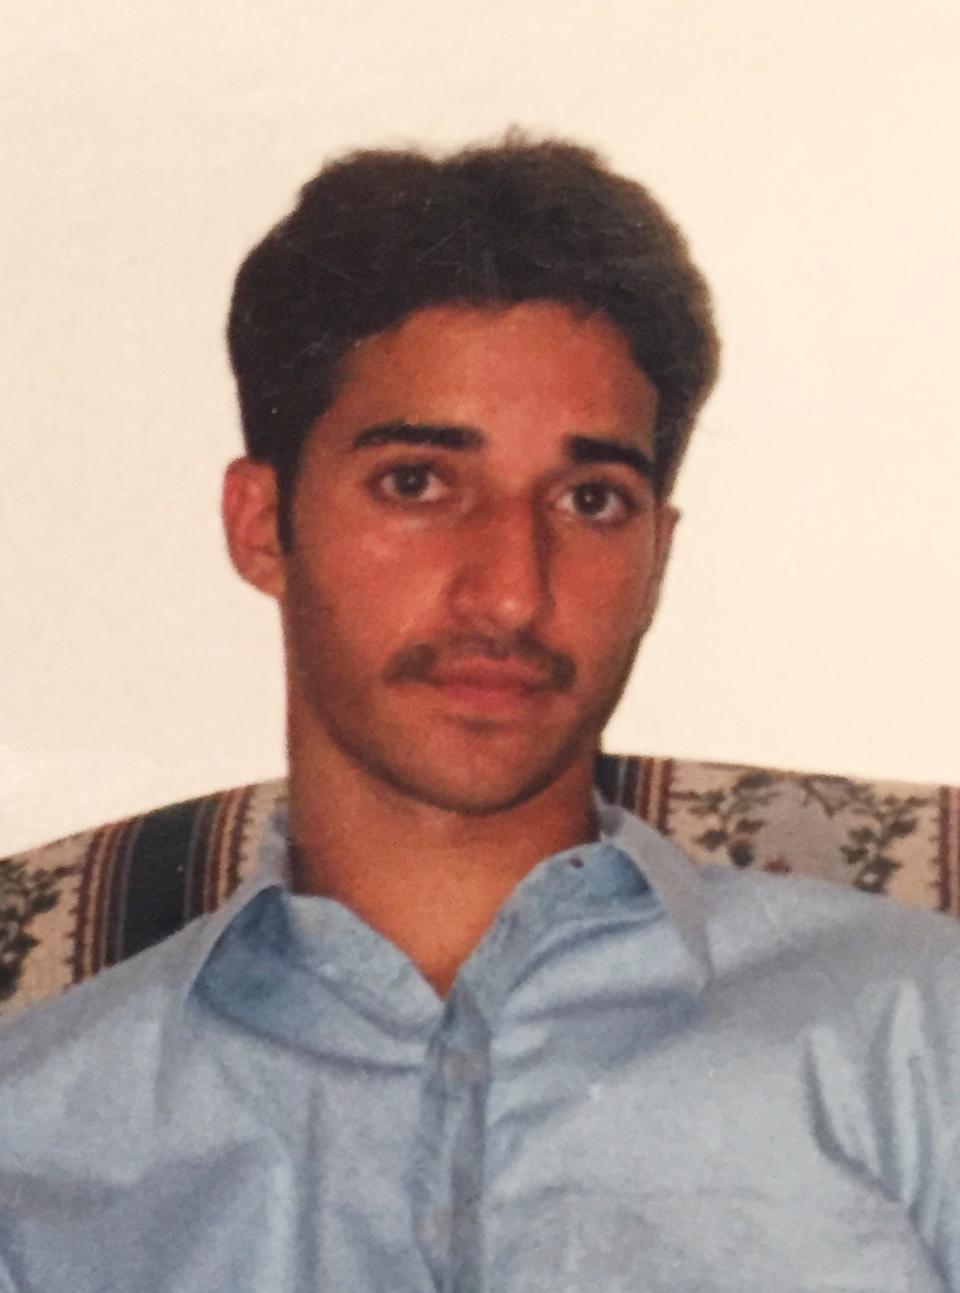 Adnan Syed, made famous on the podcast "Serial," is serving a life sentence after he was convicted of strangling a 17-year-old in Baltimore in 2000.